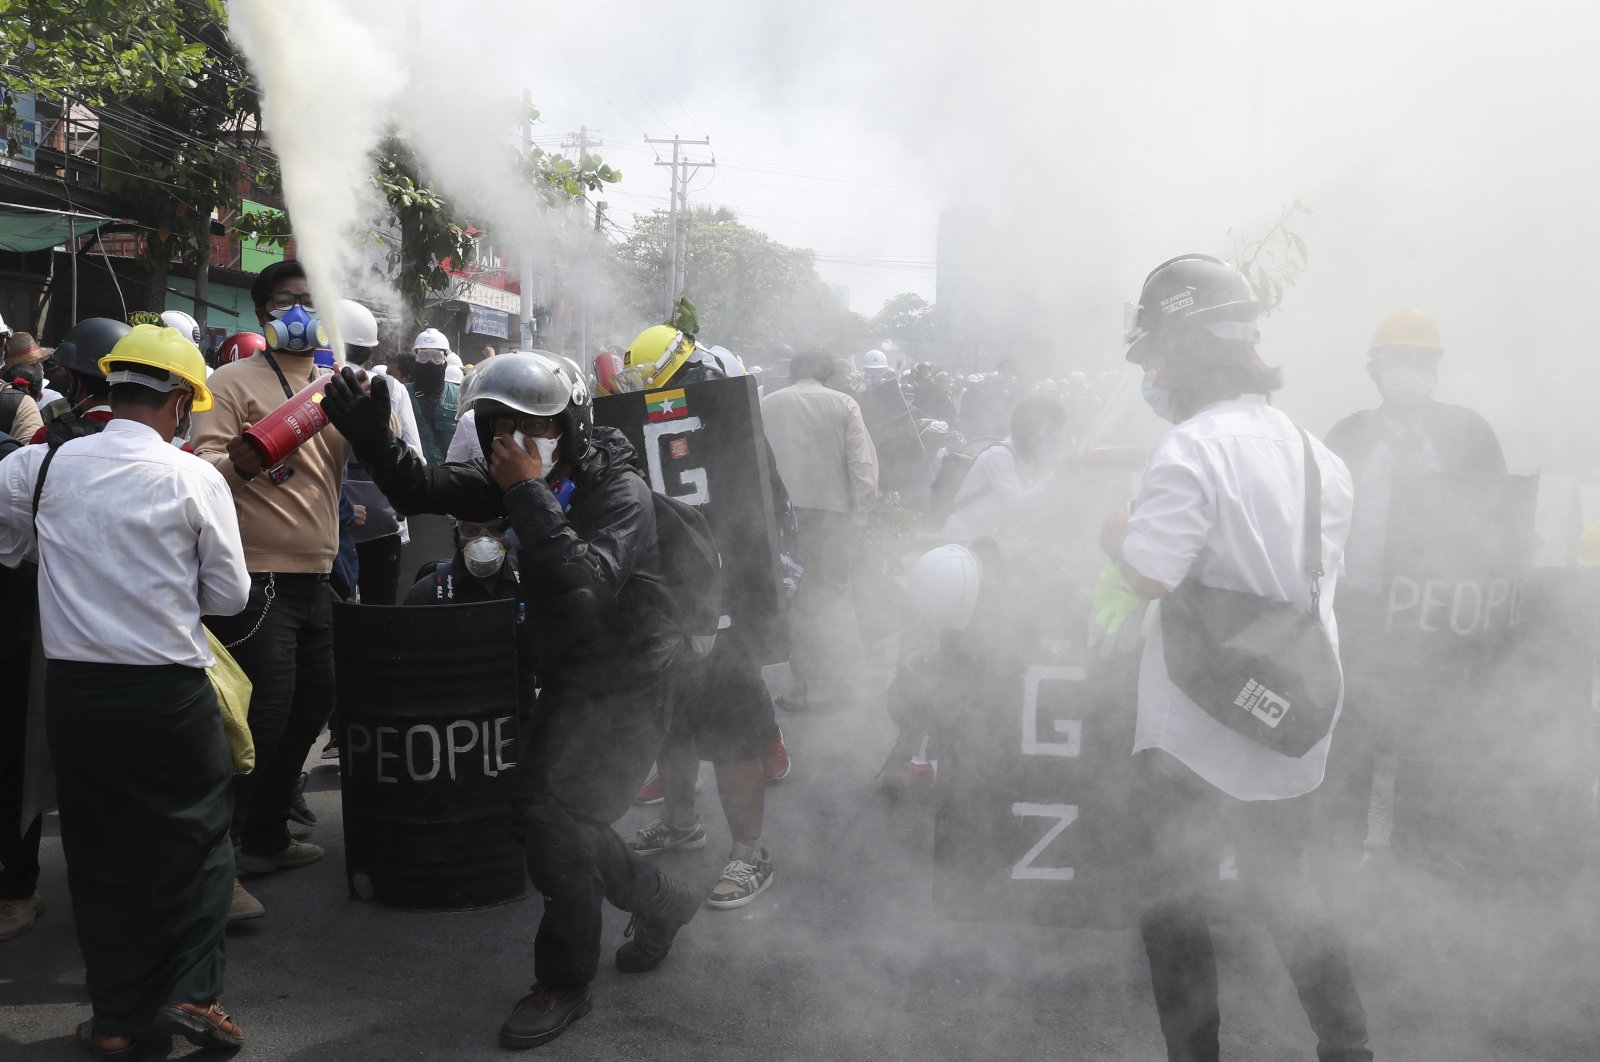 Anti-coup protesters discharge fire extinguishers to counter the impact of the tear gas fired by police during a demonstration in Mandalay, Myanmar, March 7, 2021. (AP Photo)